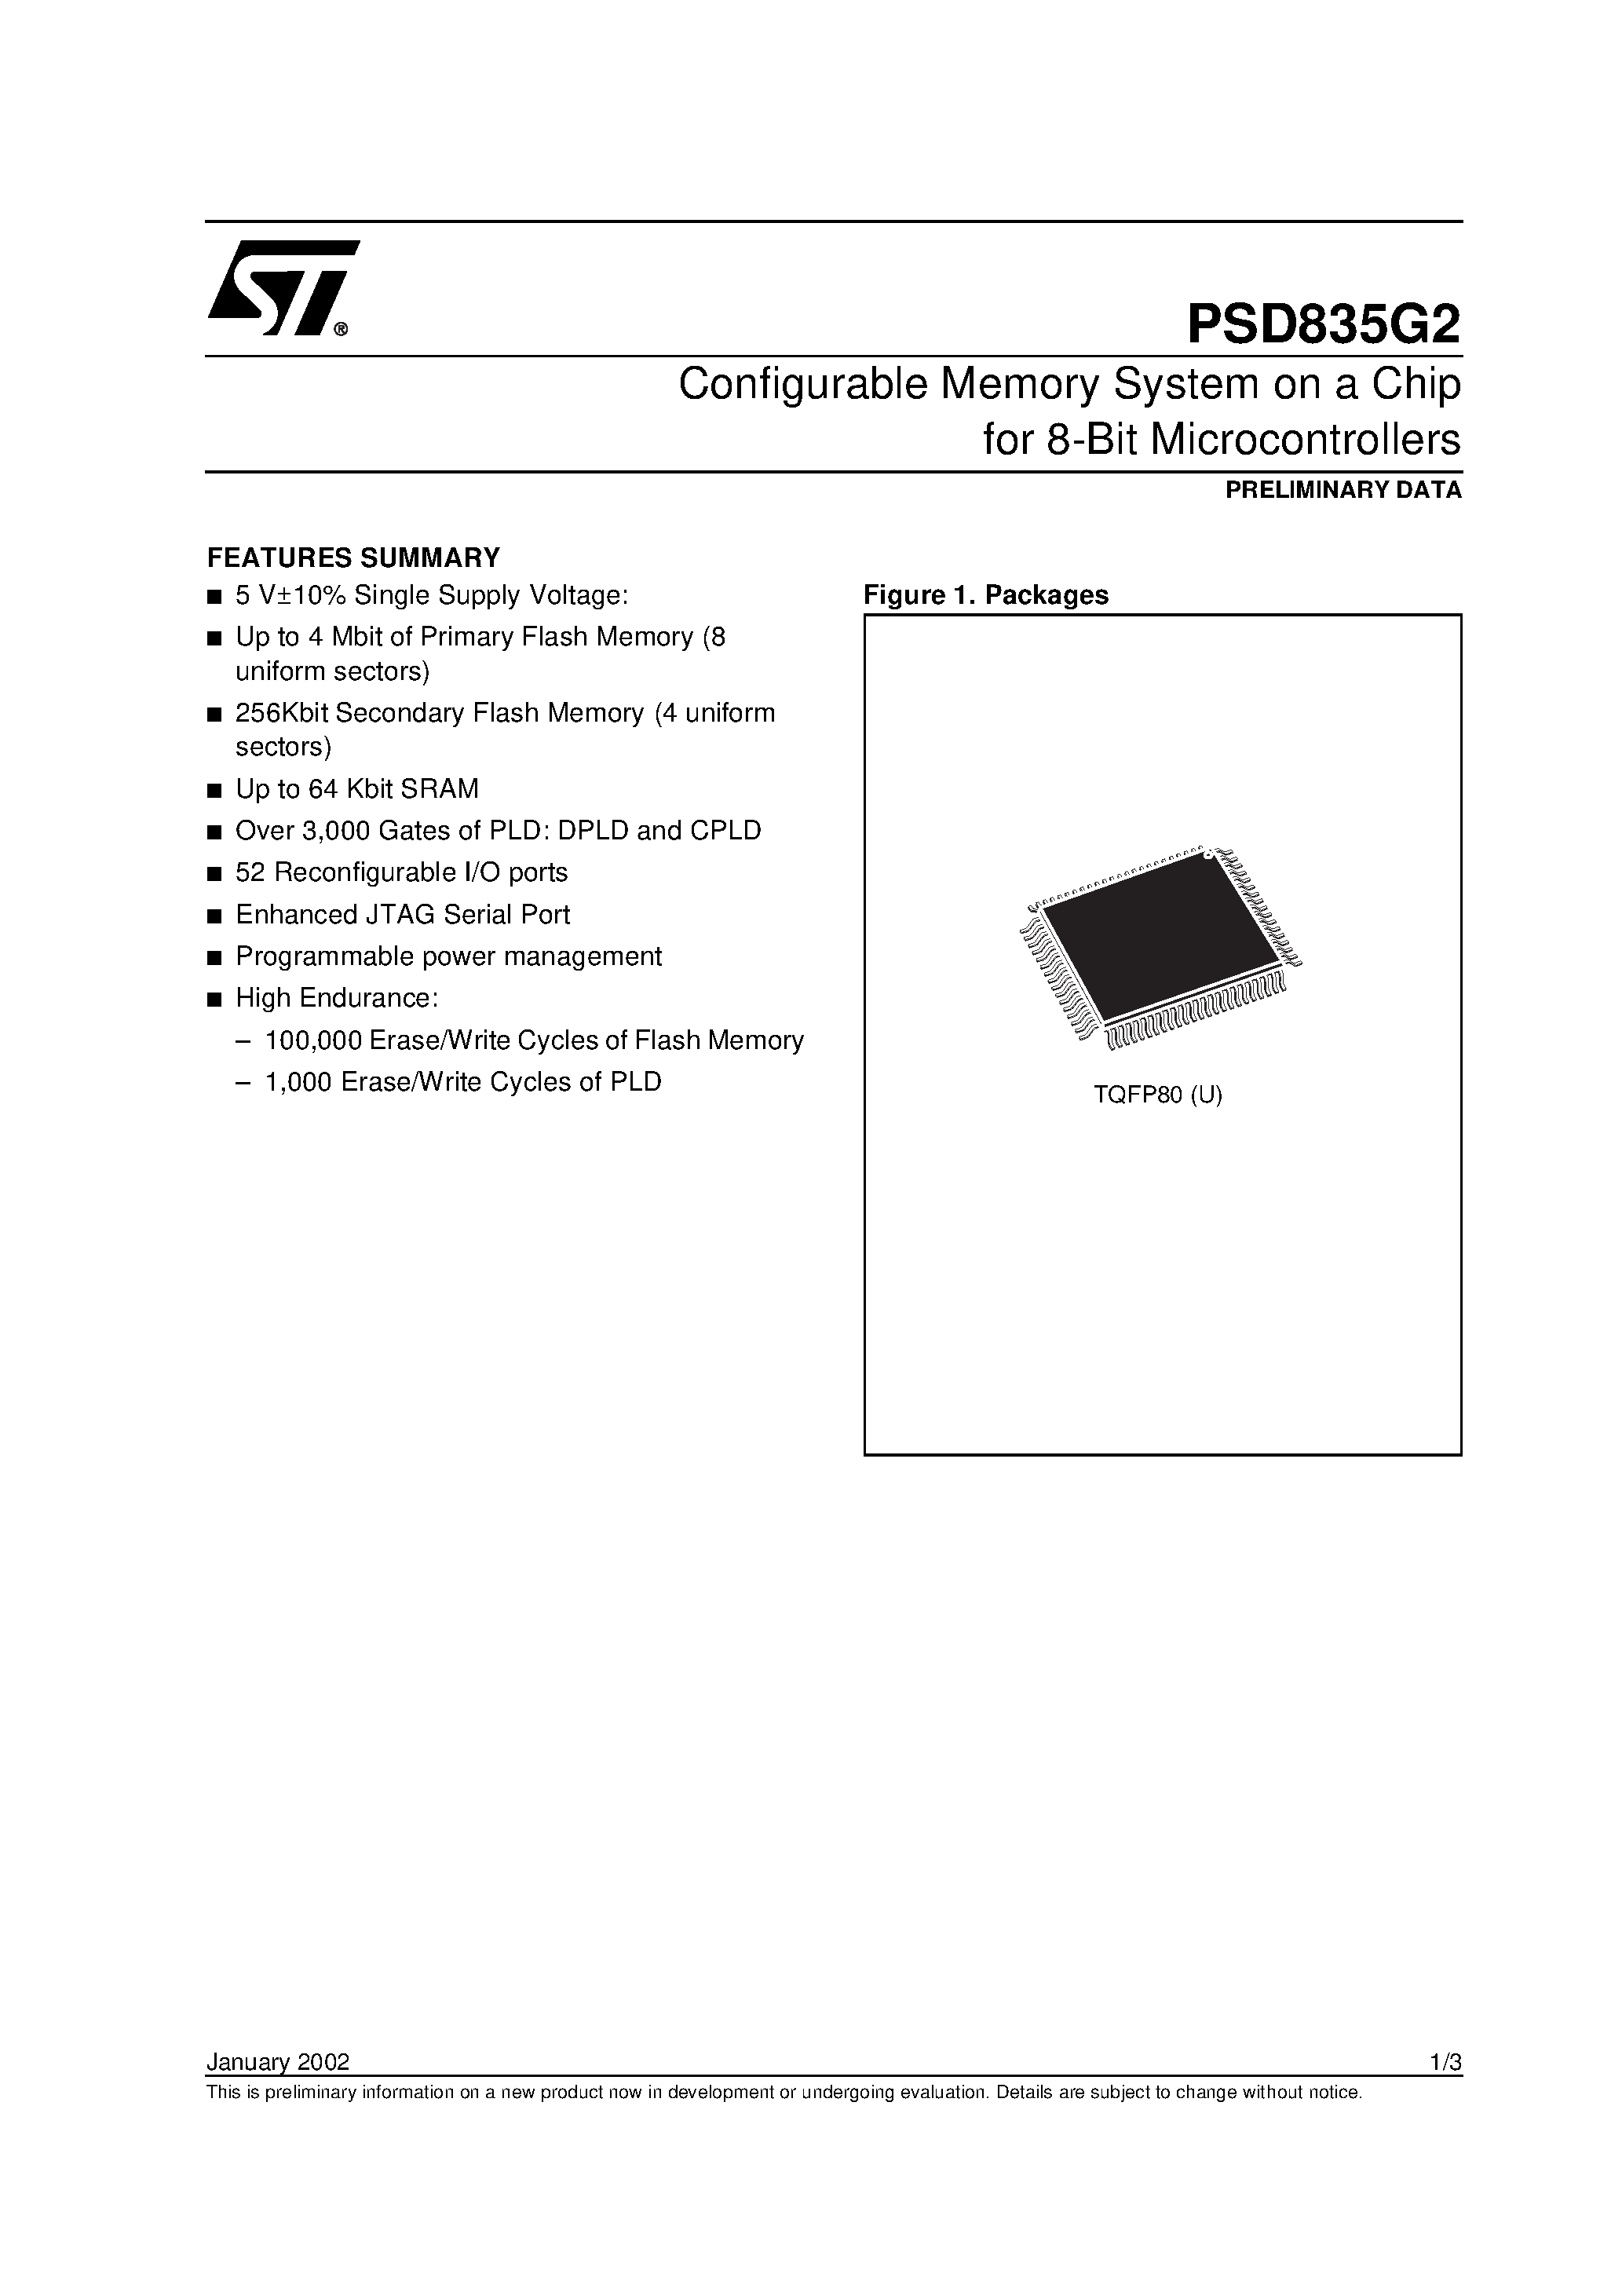 Datasheet PSD835F1-A-15JI - Configurable Memory System on a Chip for 8-Bit Microcontrollers page 1